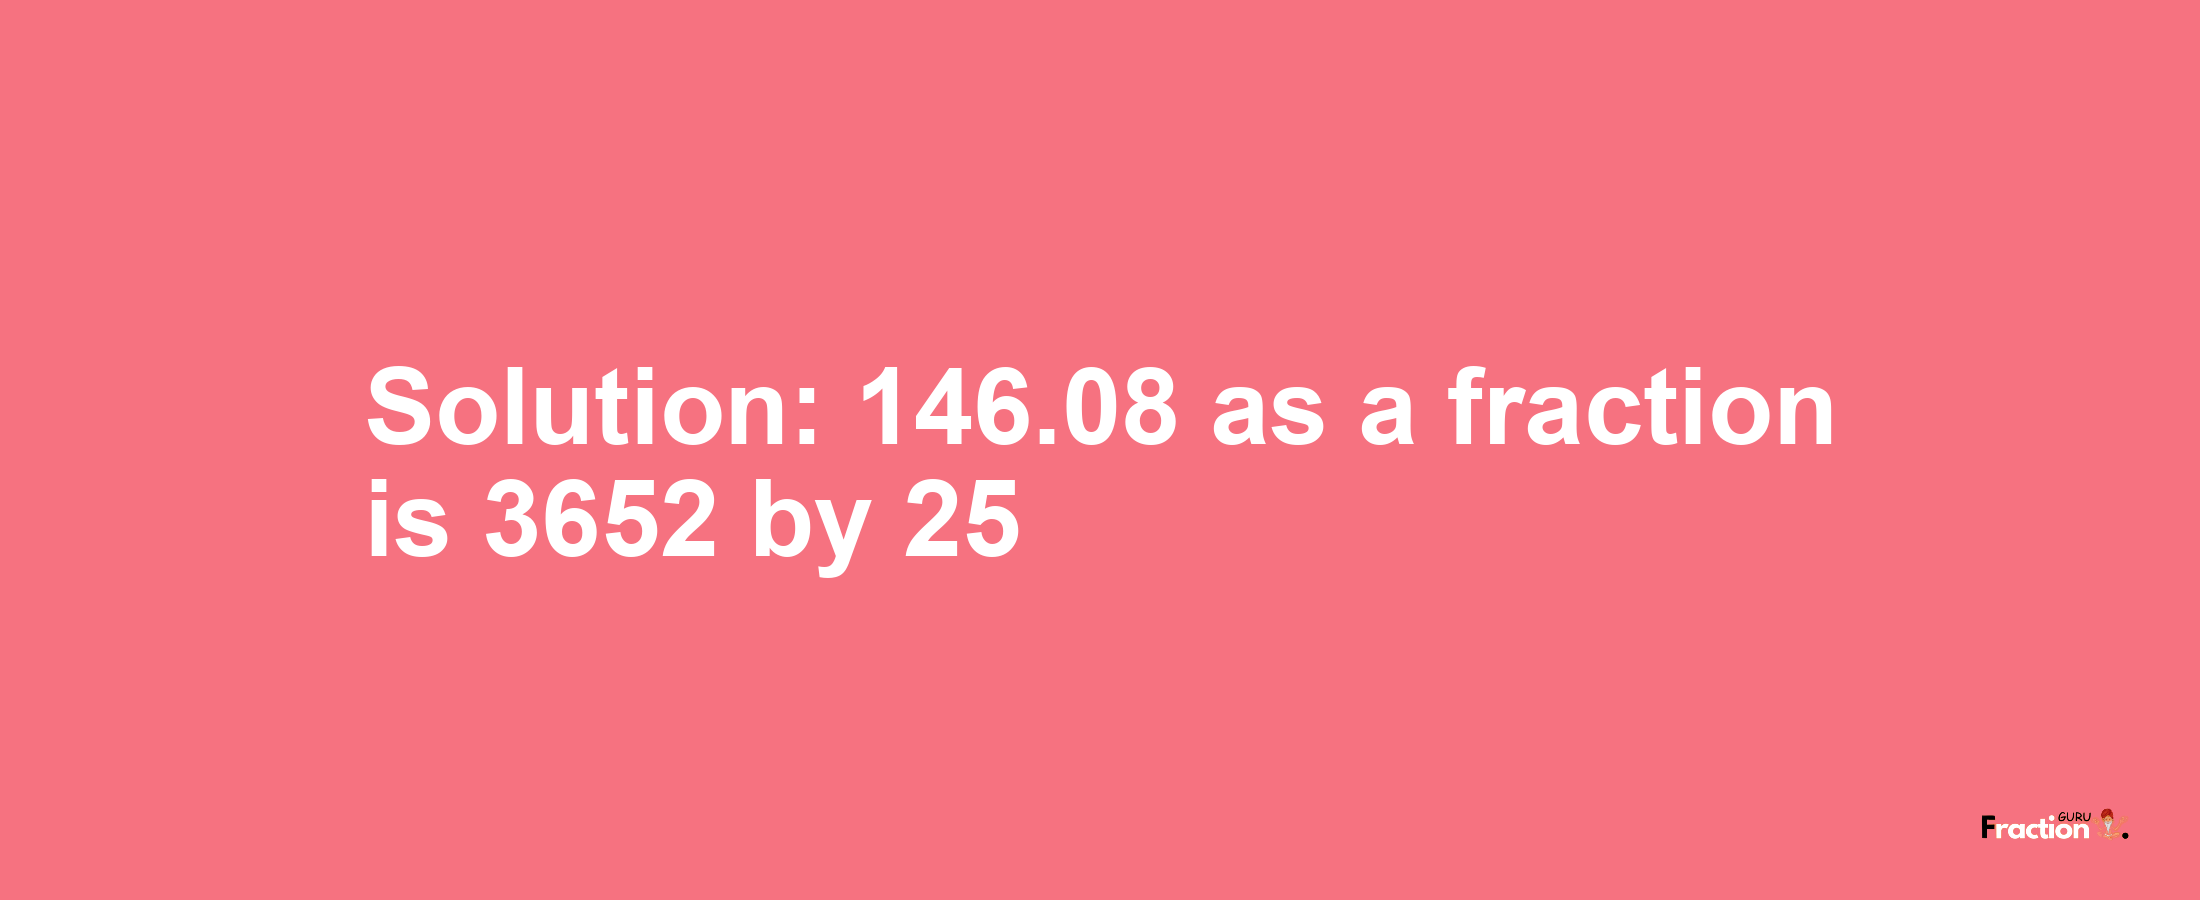 Solution:146.08 as a fraction is 3652/25